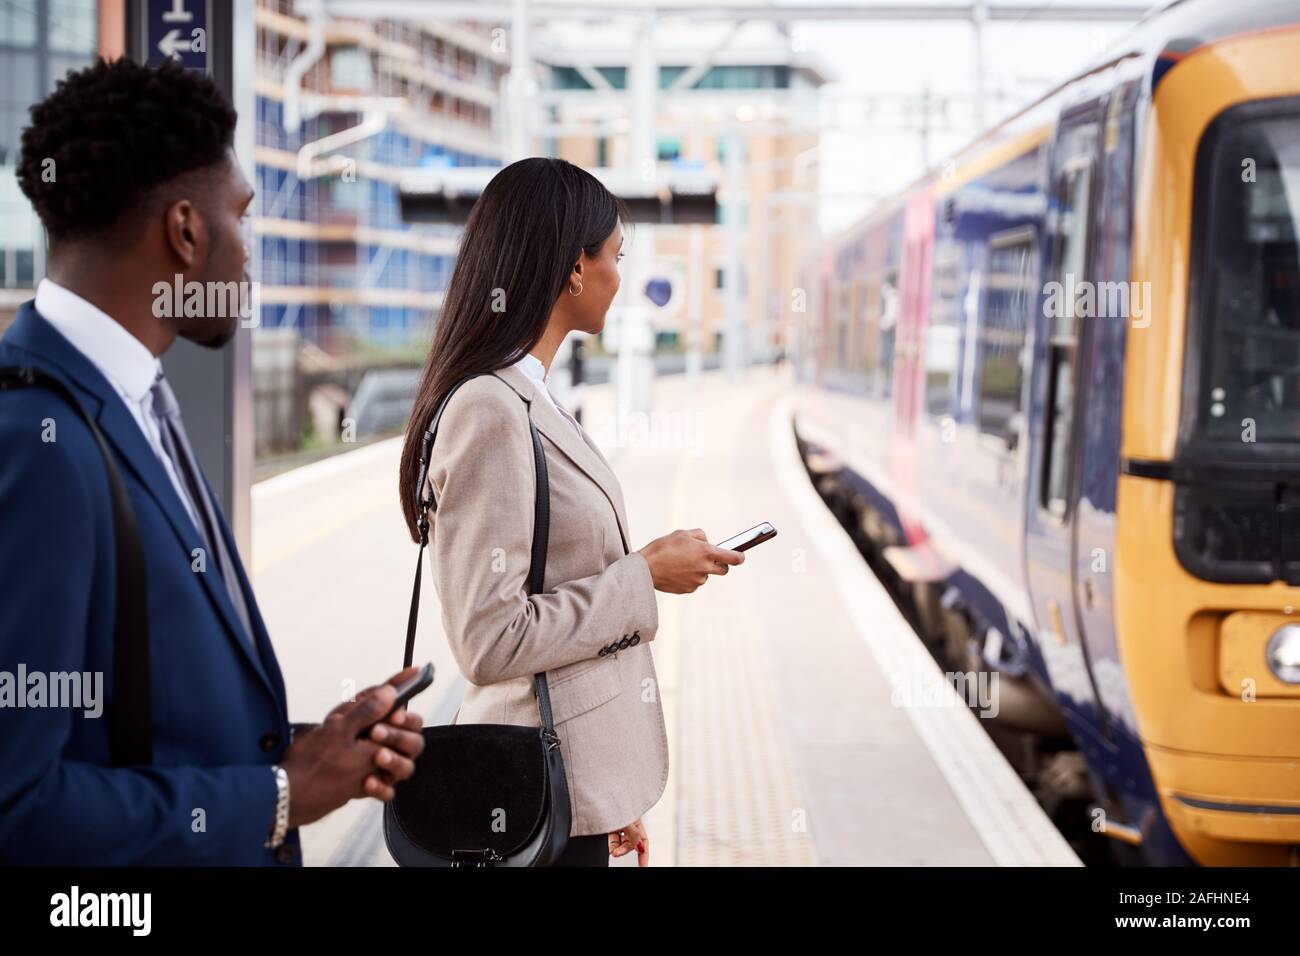 Businessman And Businesswoman Commuting To Work On Railway Platform Waiting For Train Stock Photo